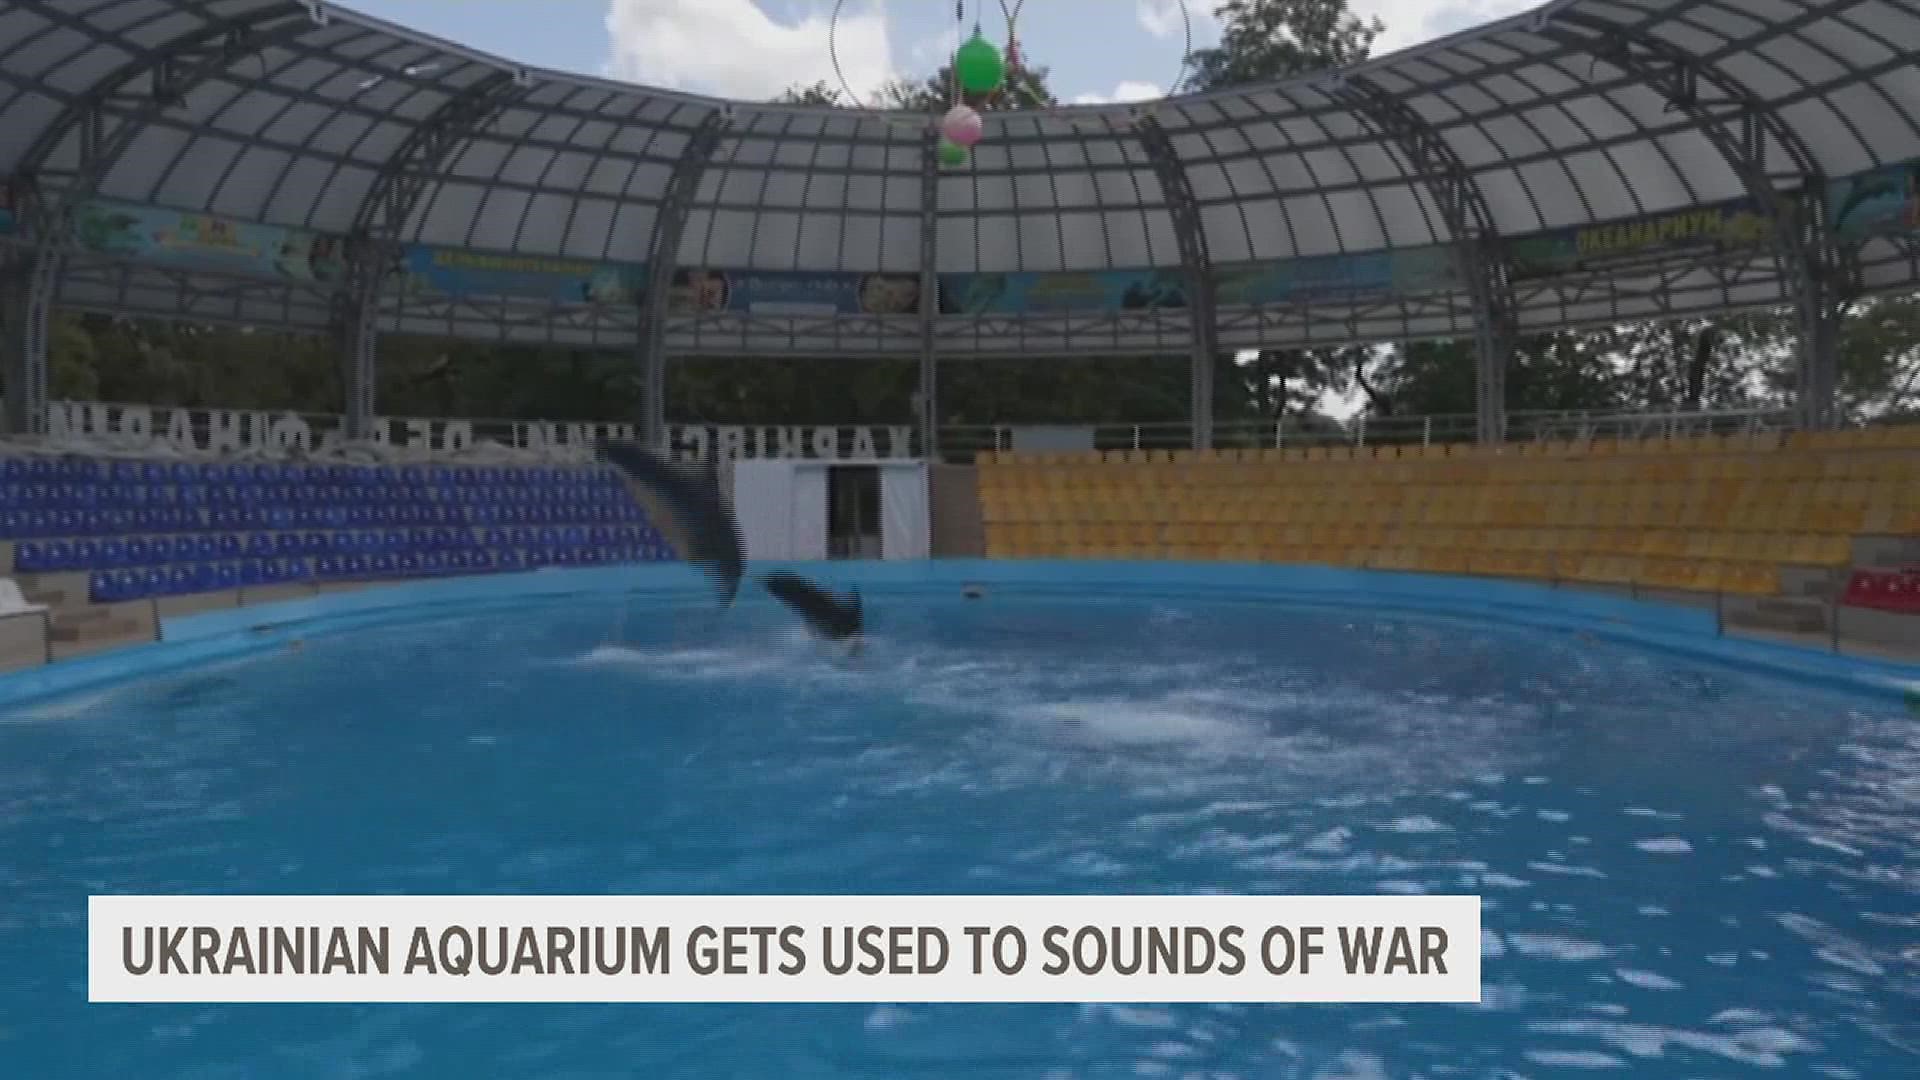 Since the war is trapping three dolphins and two belugas in the aquarium, the animals and their keepers are getting used to the stressful sounds of war.